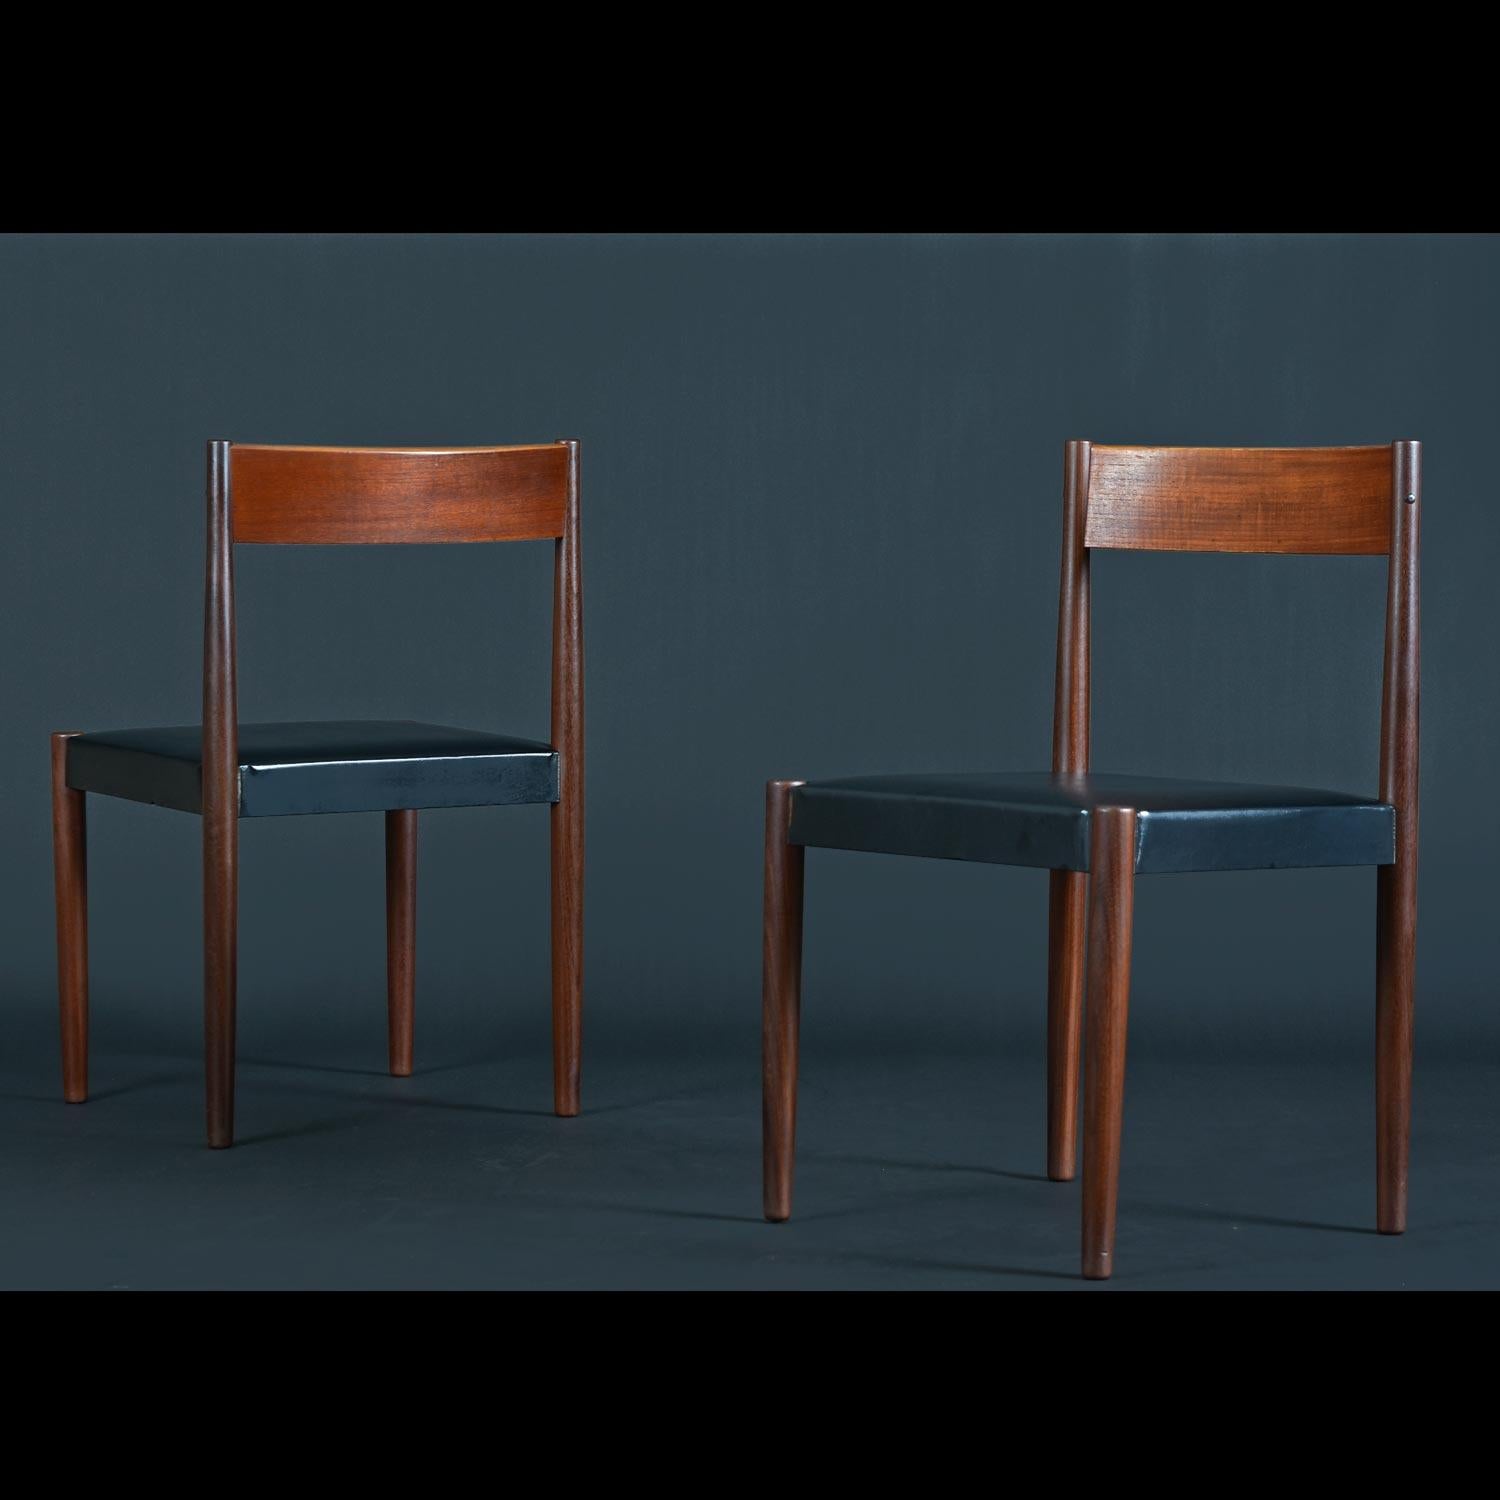 Mid-Century Modern Danish teak dining chairs set of (6) by Poul Volther for Frem Rojle. This set has been professionally detailed and rejuvenated by our in-house restoration team and the teak looks outstanding. You'll notice the curved shell backs